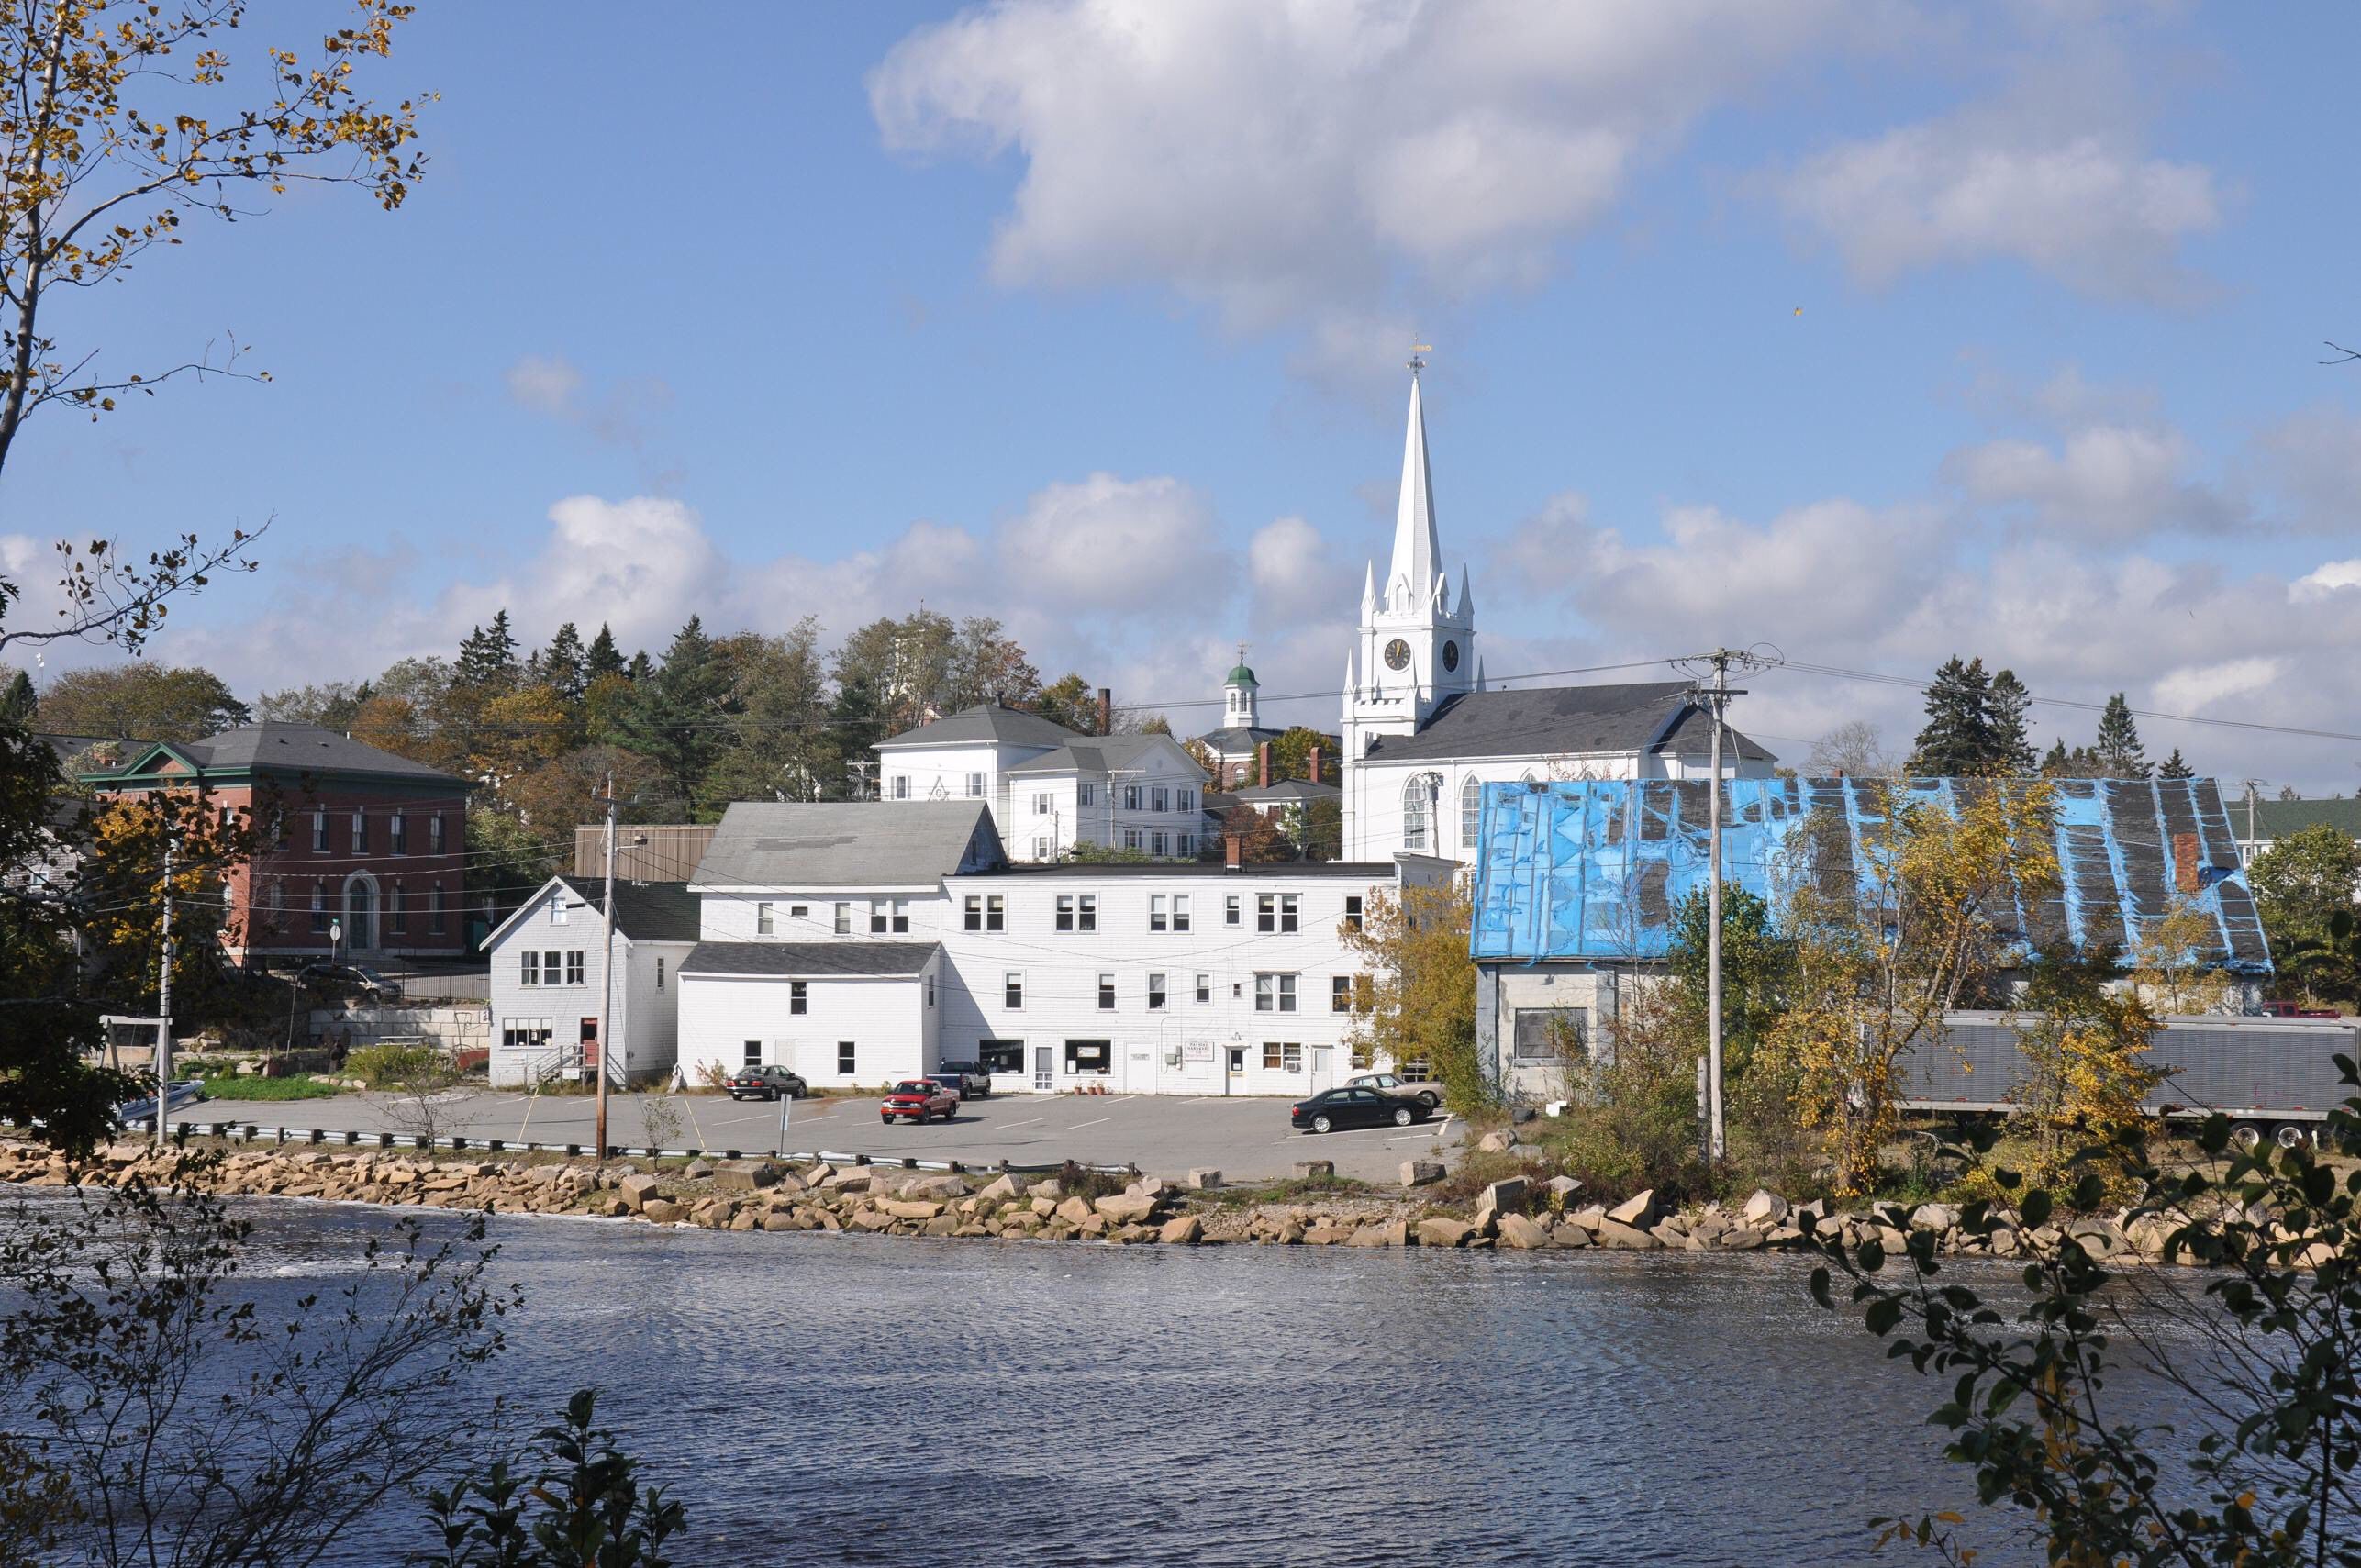 How to Spend a Day in Machias, Maine